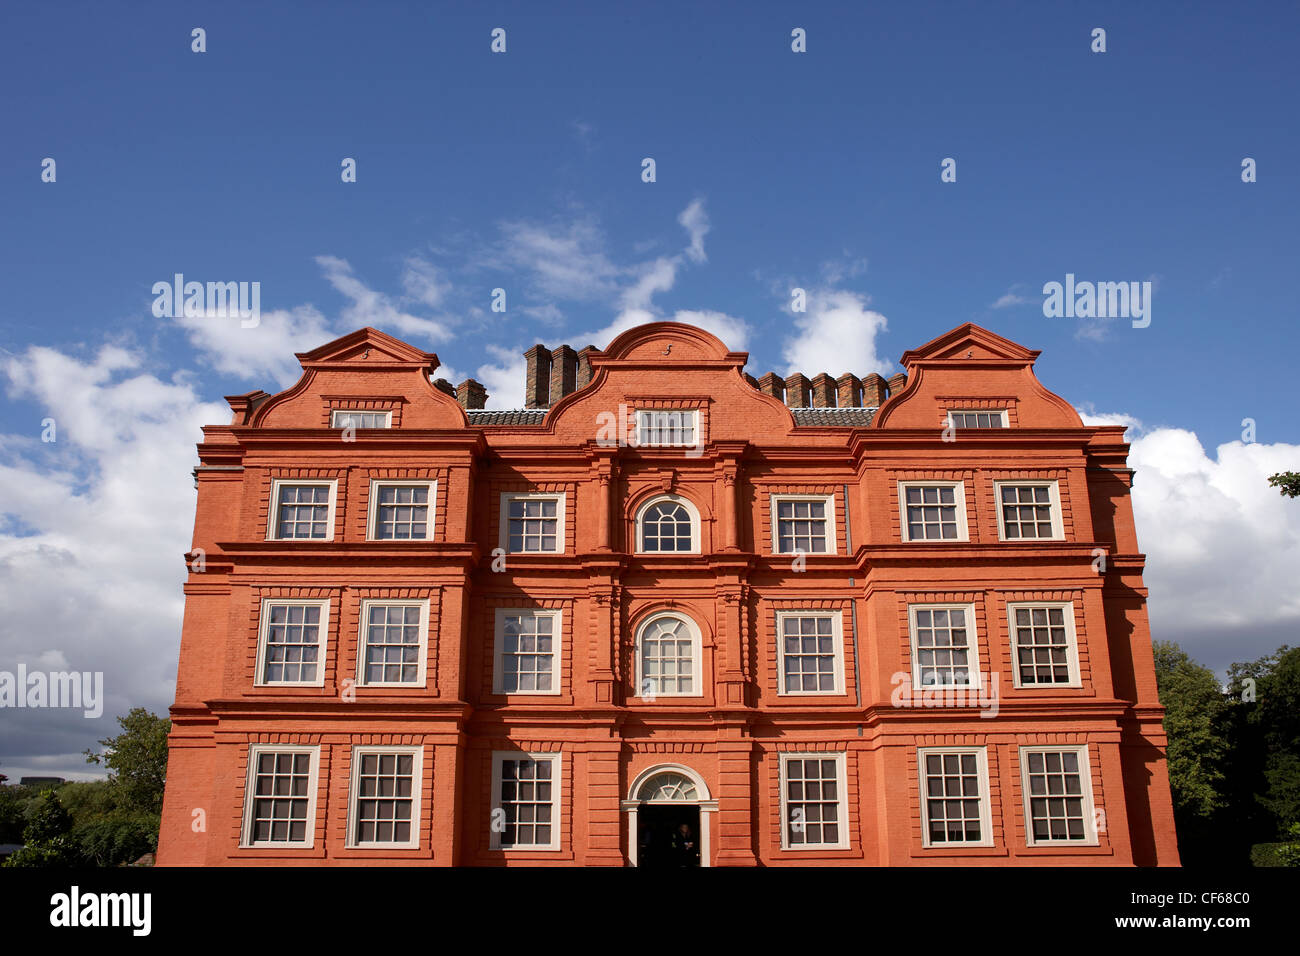 The Dutch House. Historically significant for its association with the Royal family, the Dutch House (now known as Kew Palace) i Stock Photo